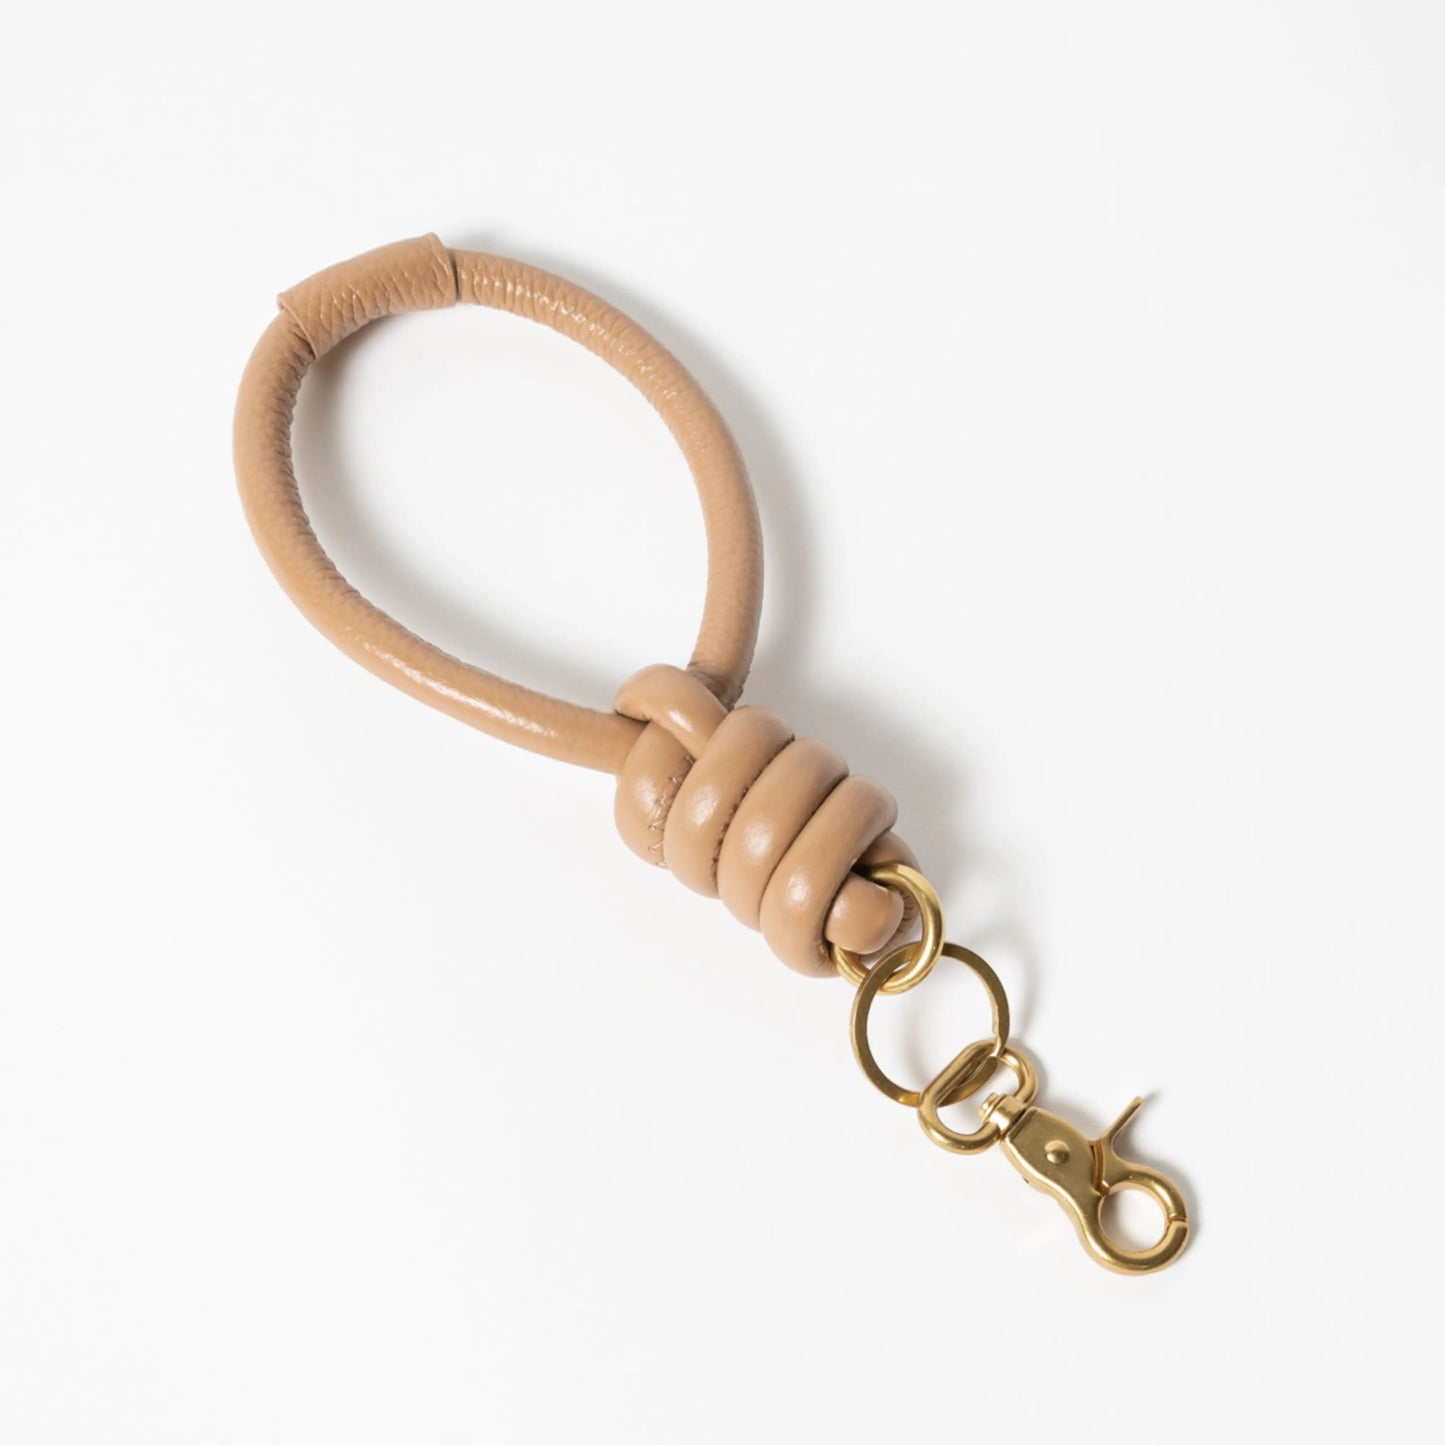 ALF THE LABEL - Luxe Knot Keyring